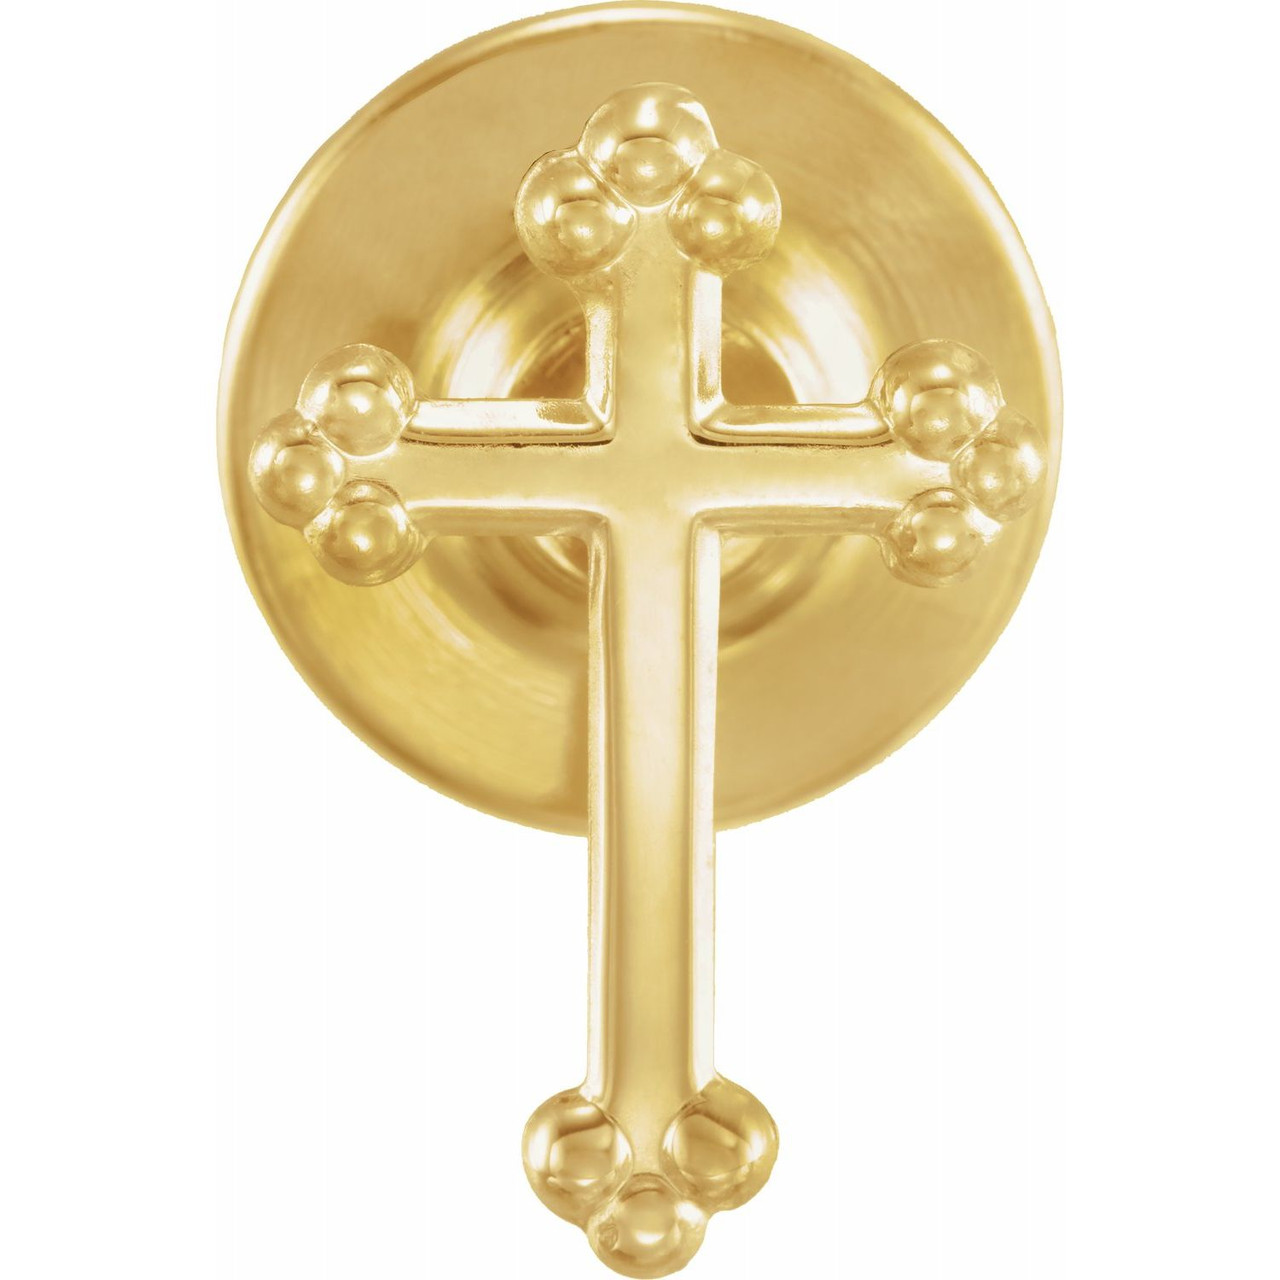 Christian Fish and Cross Gold Tie Tack